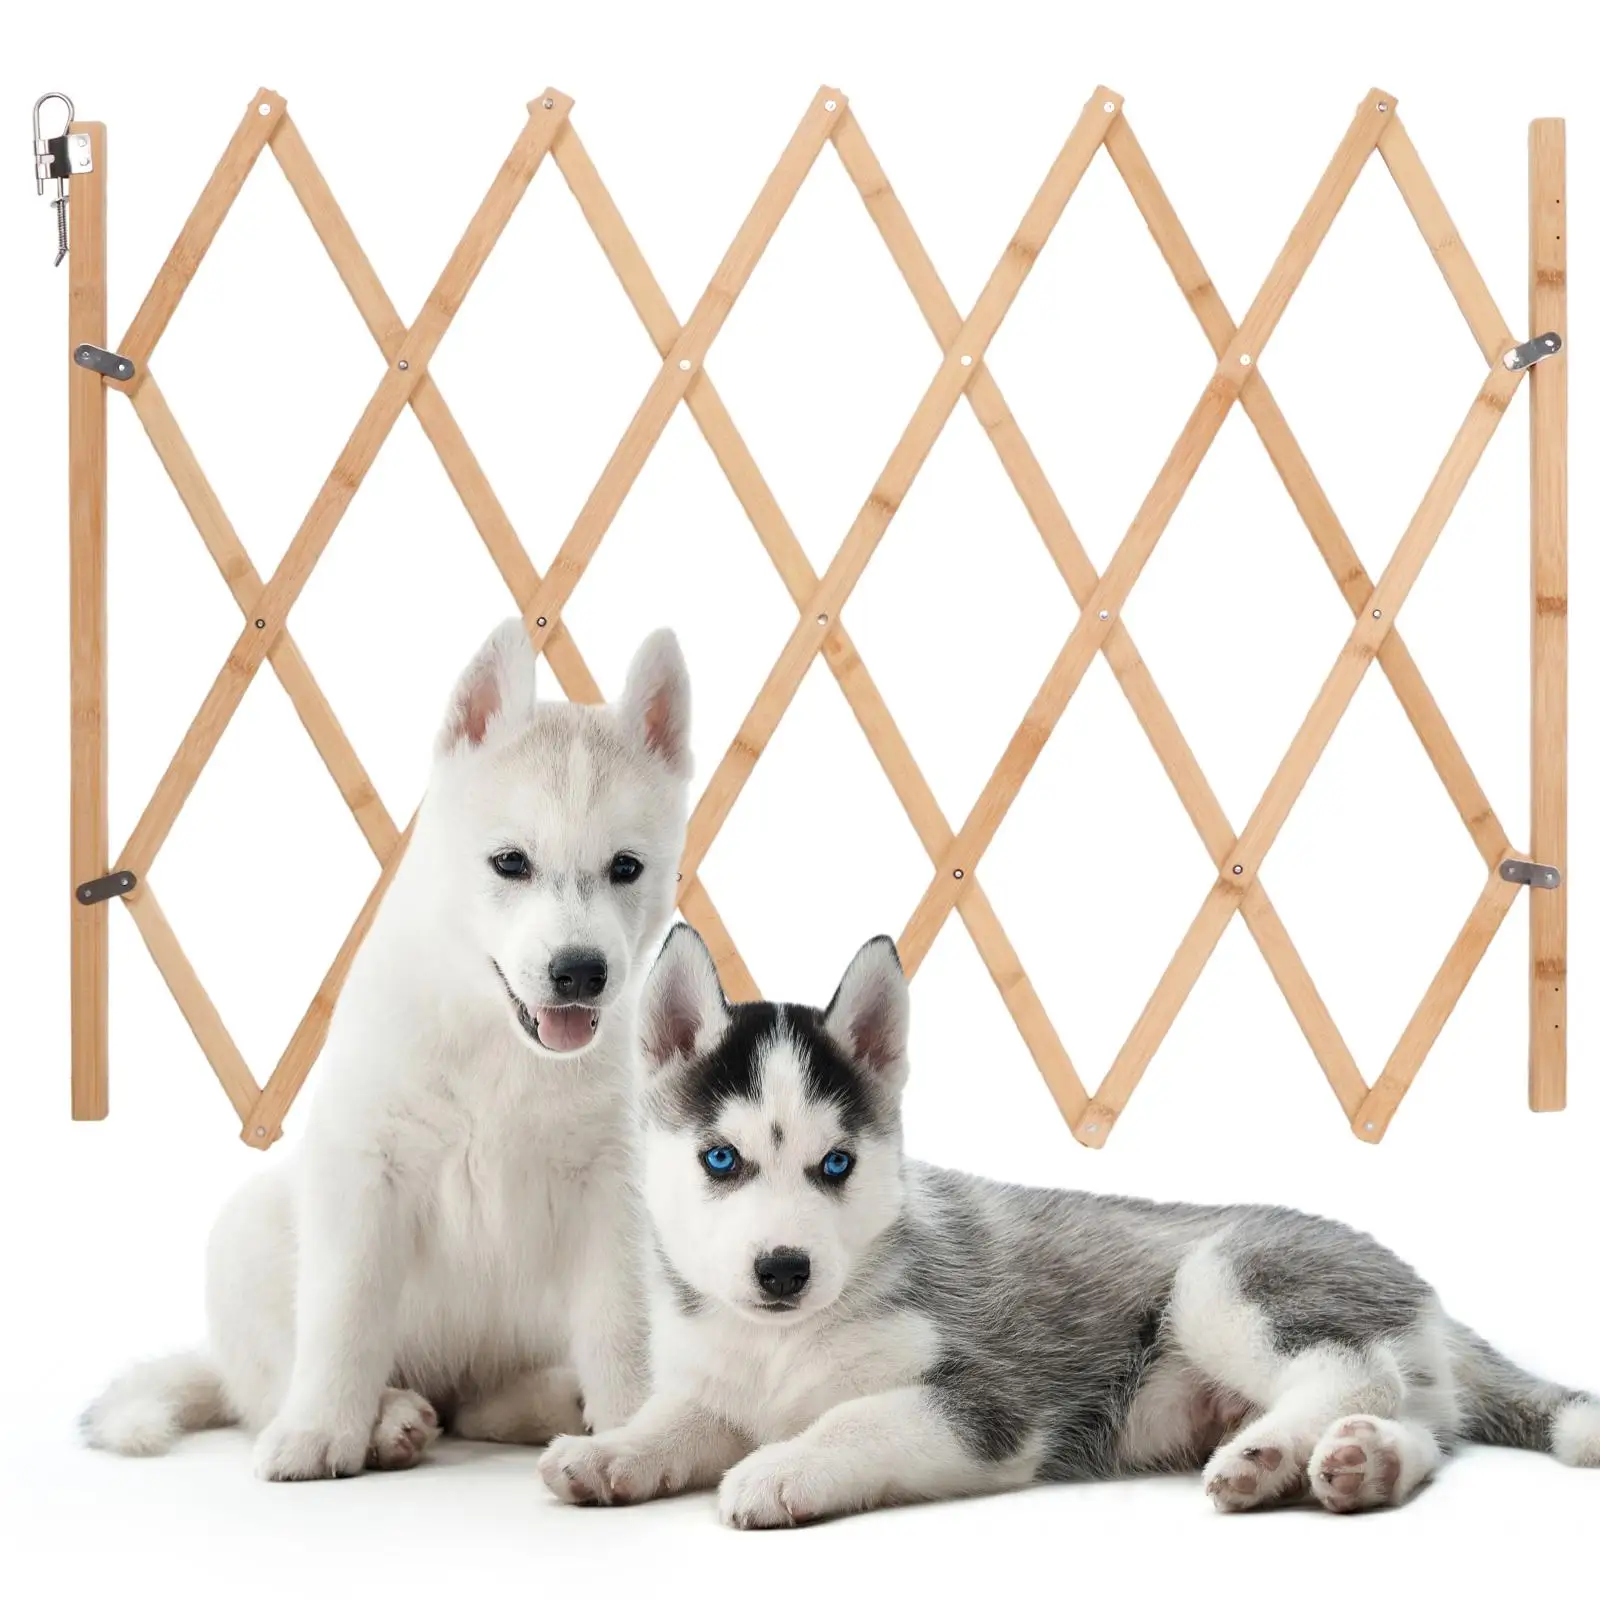 Dog Puppy Folding Fence Freestanding Pet Isolate Gate Expansion Gate for Patio Stairways Outdoor Hallways Small Medium Pet